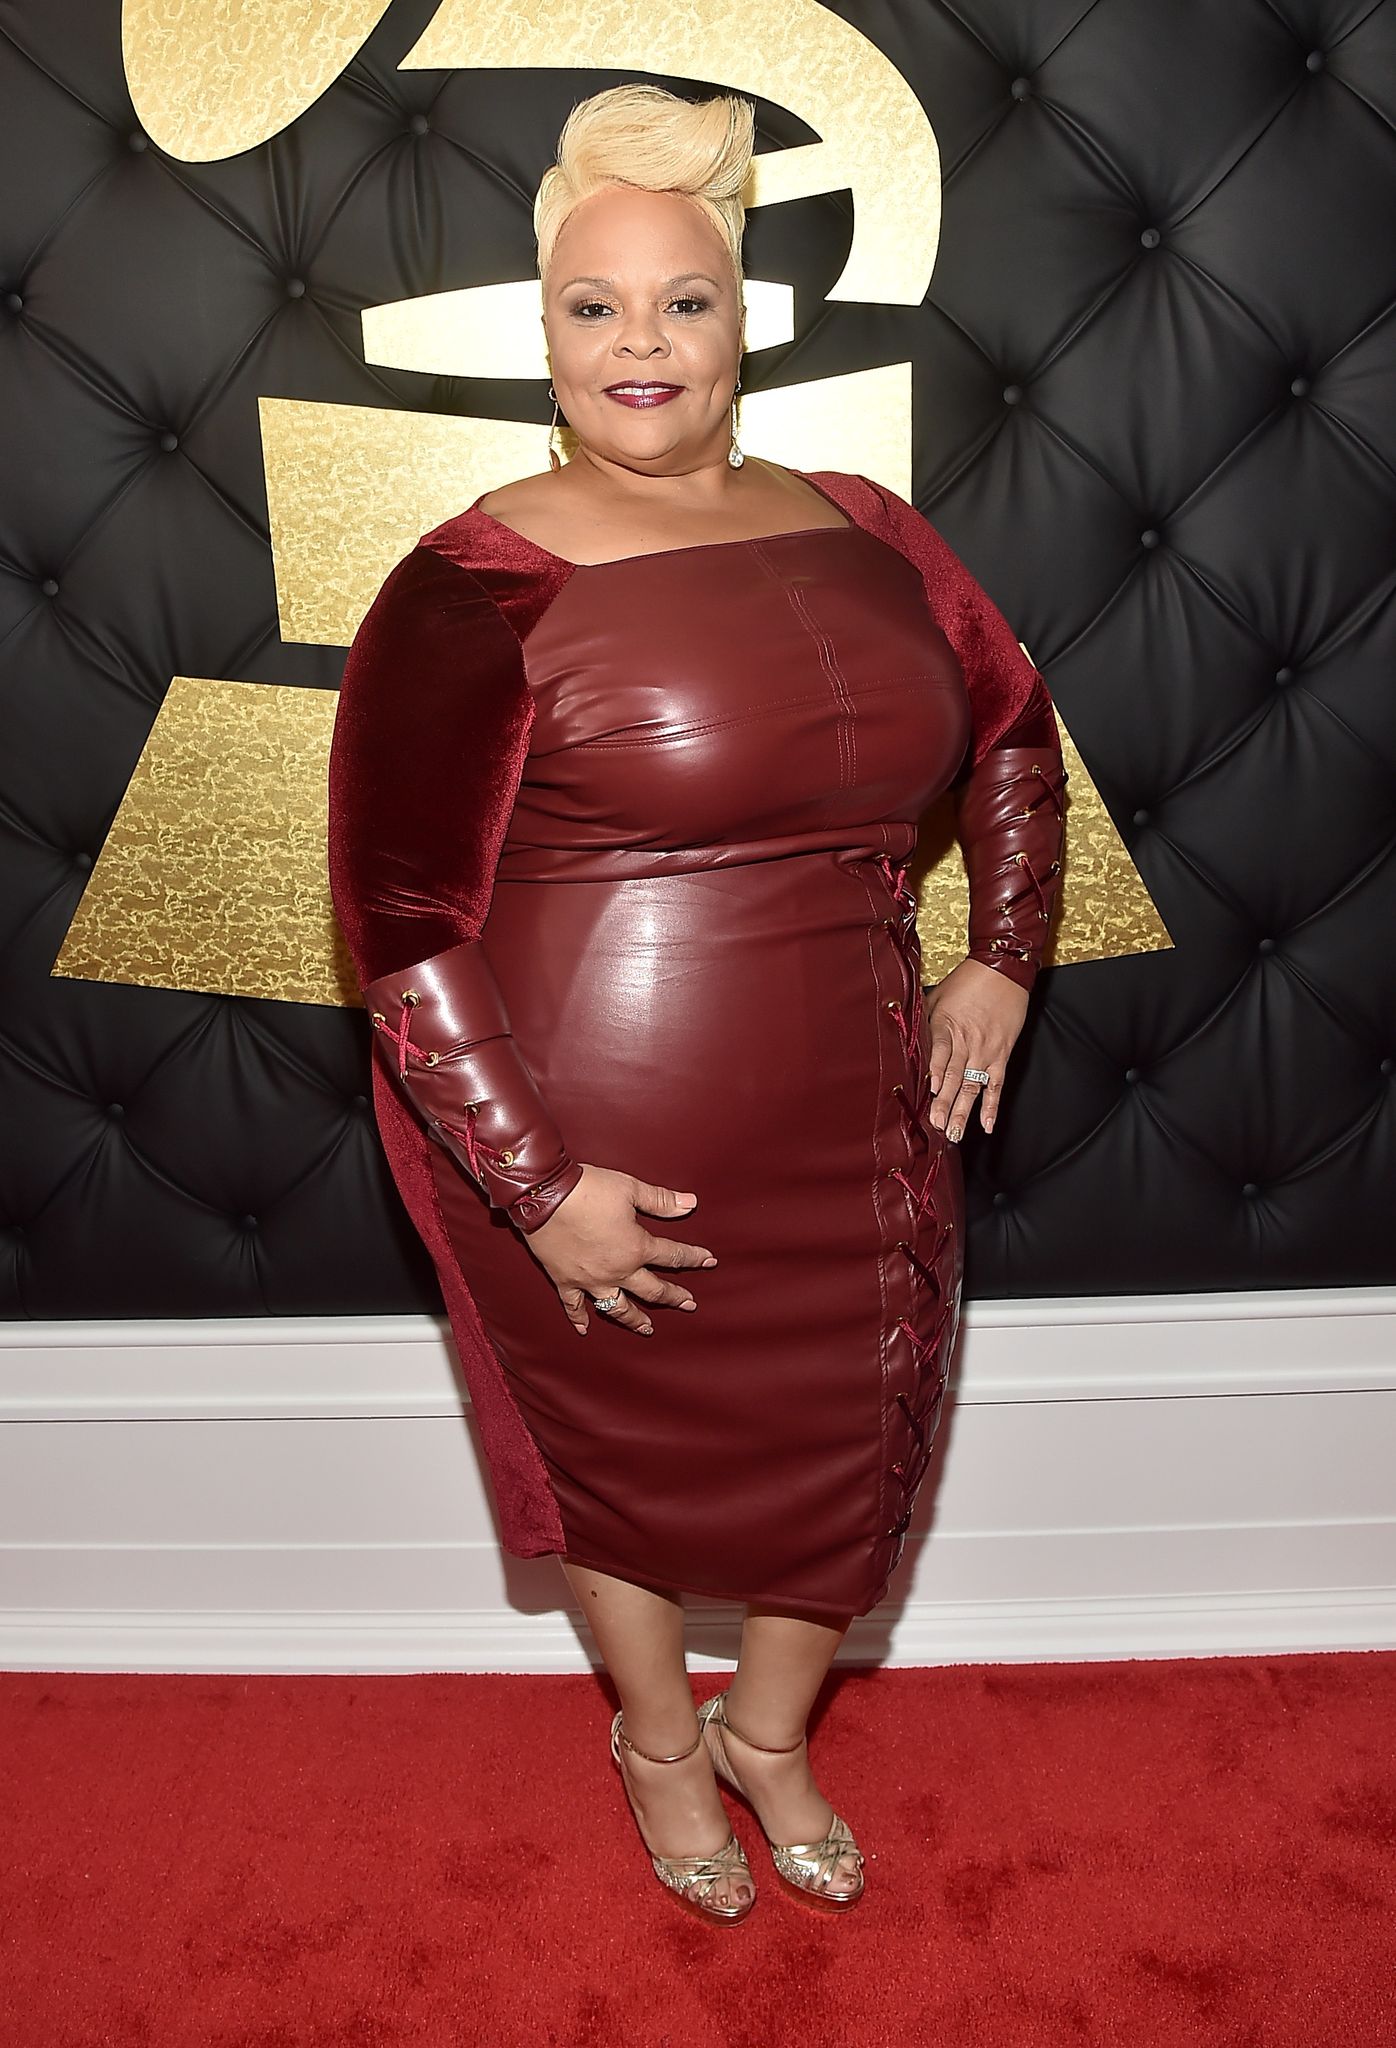 Tamela Mann at The 59th GRAMMY Awards at STAPLES Center on February 12, 2017 in Los Angeles, California. | Photo: Getty Images